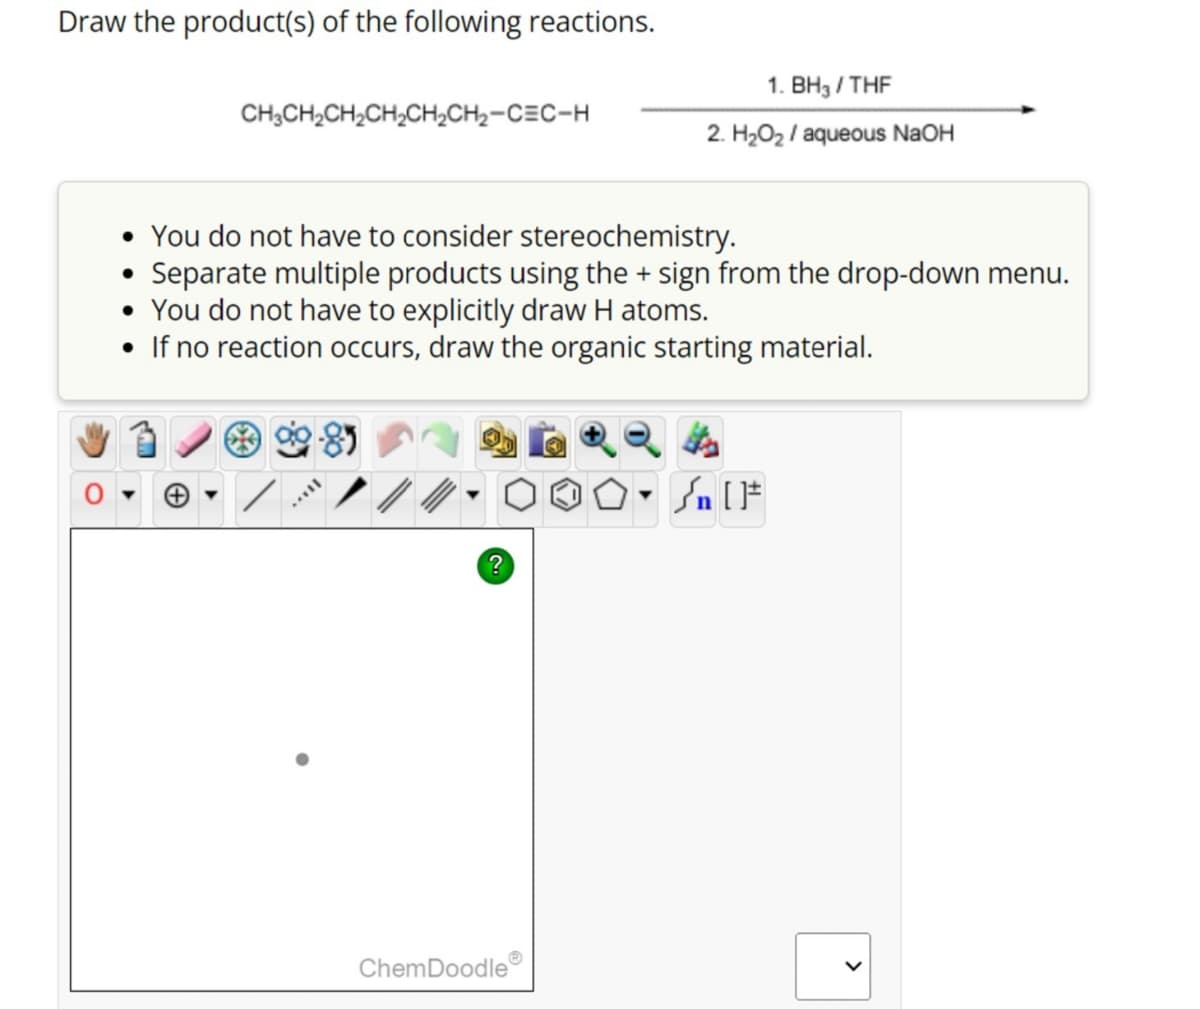 Draw the product(s) of the following reactions.
CH3CH₂CH₂CH₂CH₂CH₂-CEC-H
• You do not have to consider stereochemistry.
• Separate multiple products using the + sign from the drop-down menu.
• You do not have to explicitly draw H atoms.
• If no reaction occurs, draw the organic starting material.
MILL
?
1. BH3/THF
2. H₂O₂ / aqueous NaOH
ChemDoodle
۵۰ []
Sn